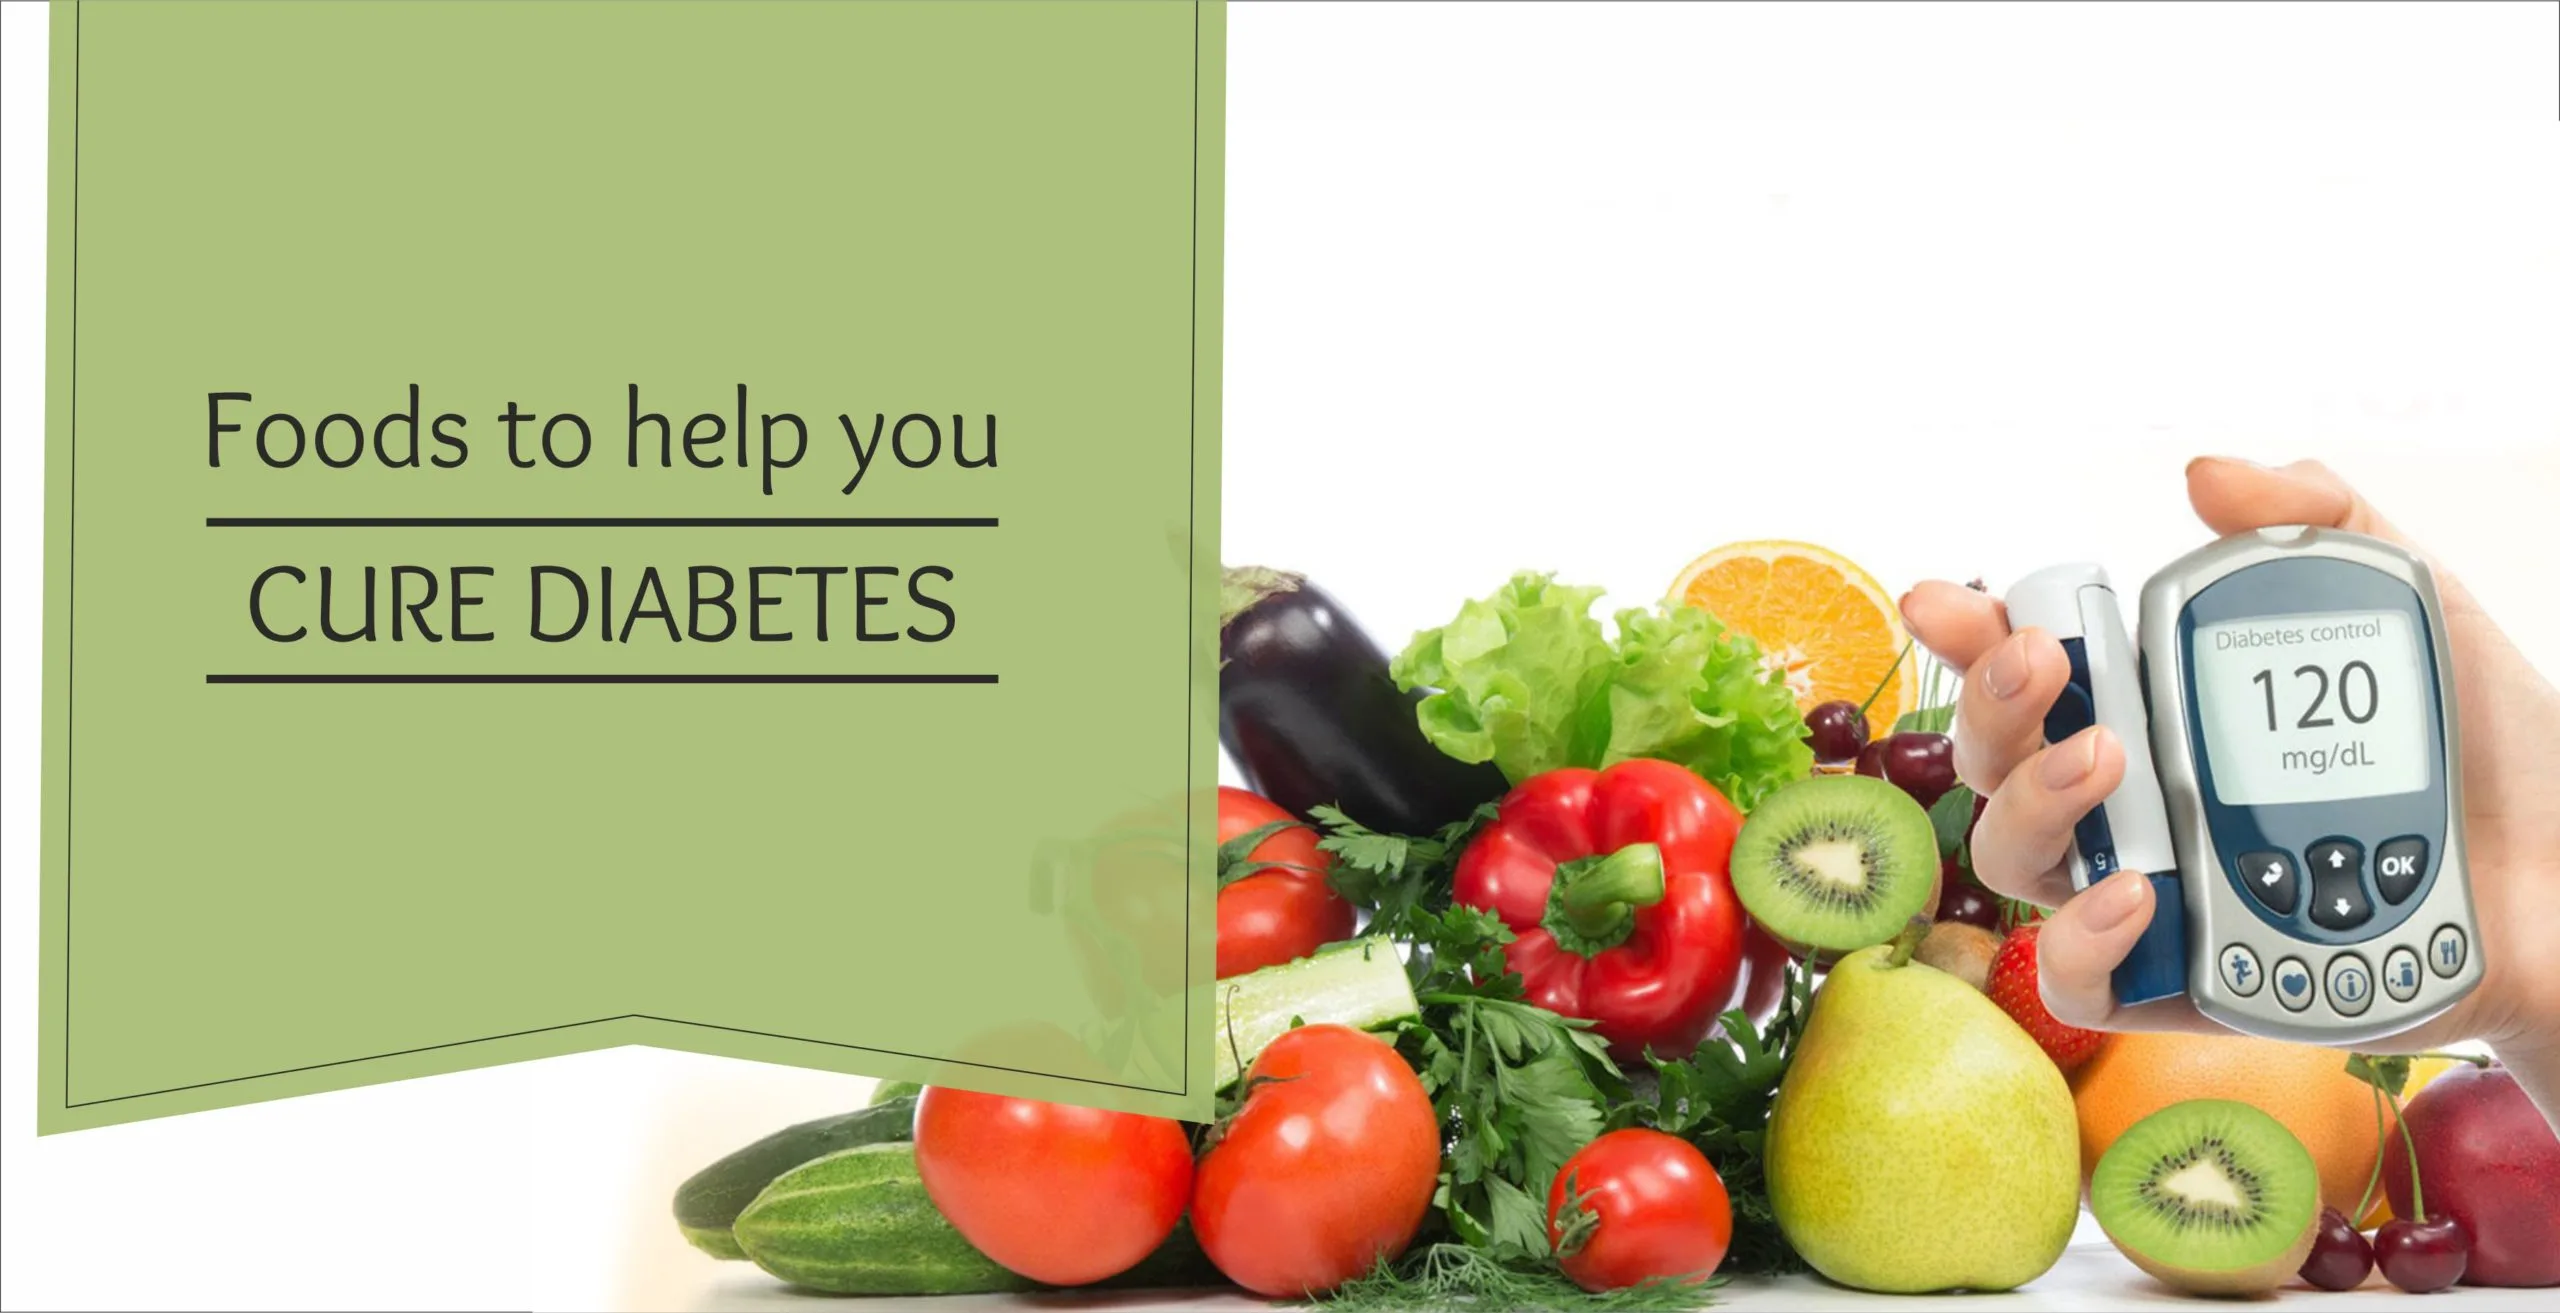 https://www.miracleshealth.com/assets/blog/assets/uploads/blog/Foods-to-help-you-cure-diabetes